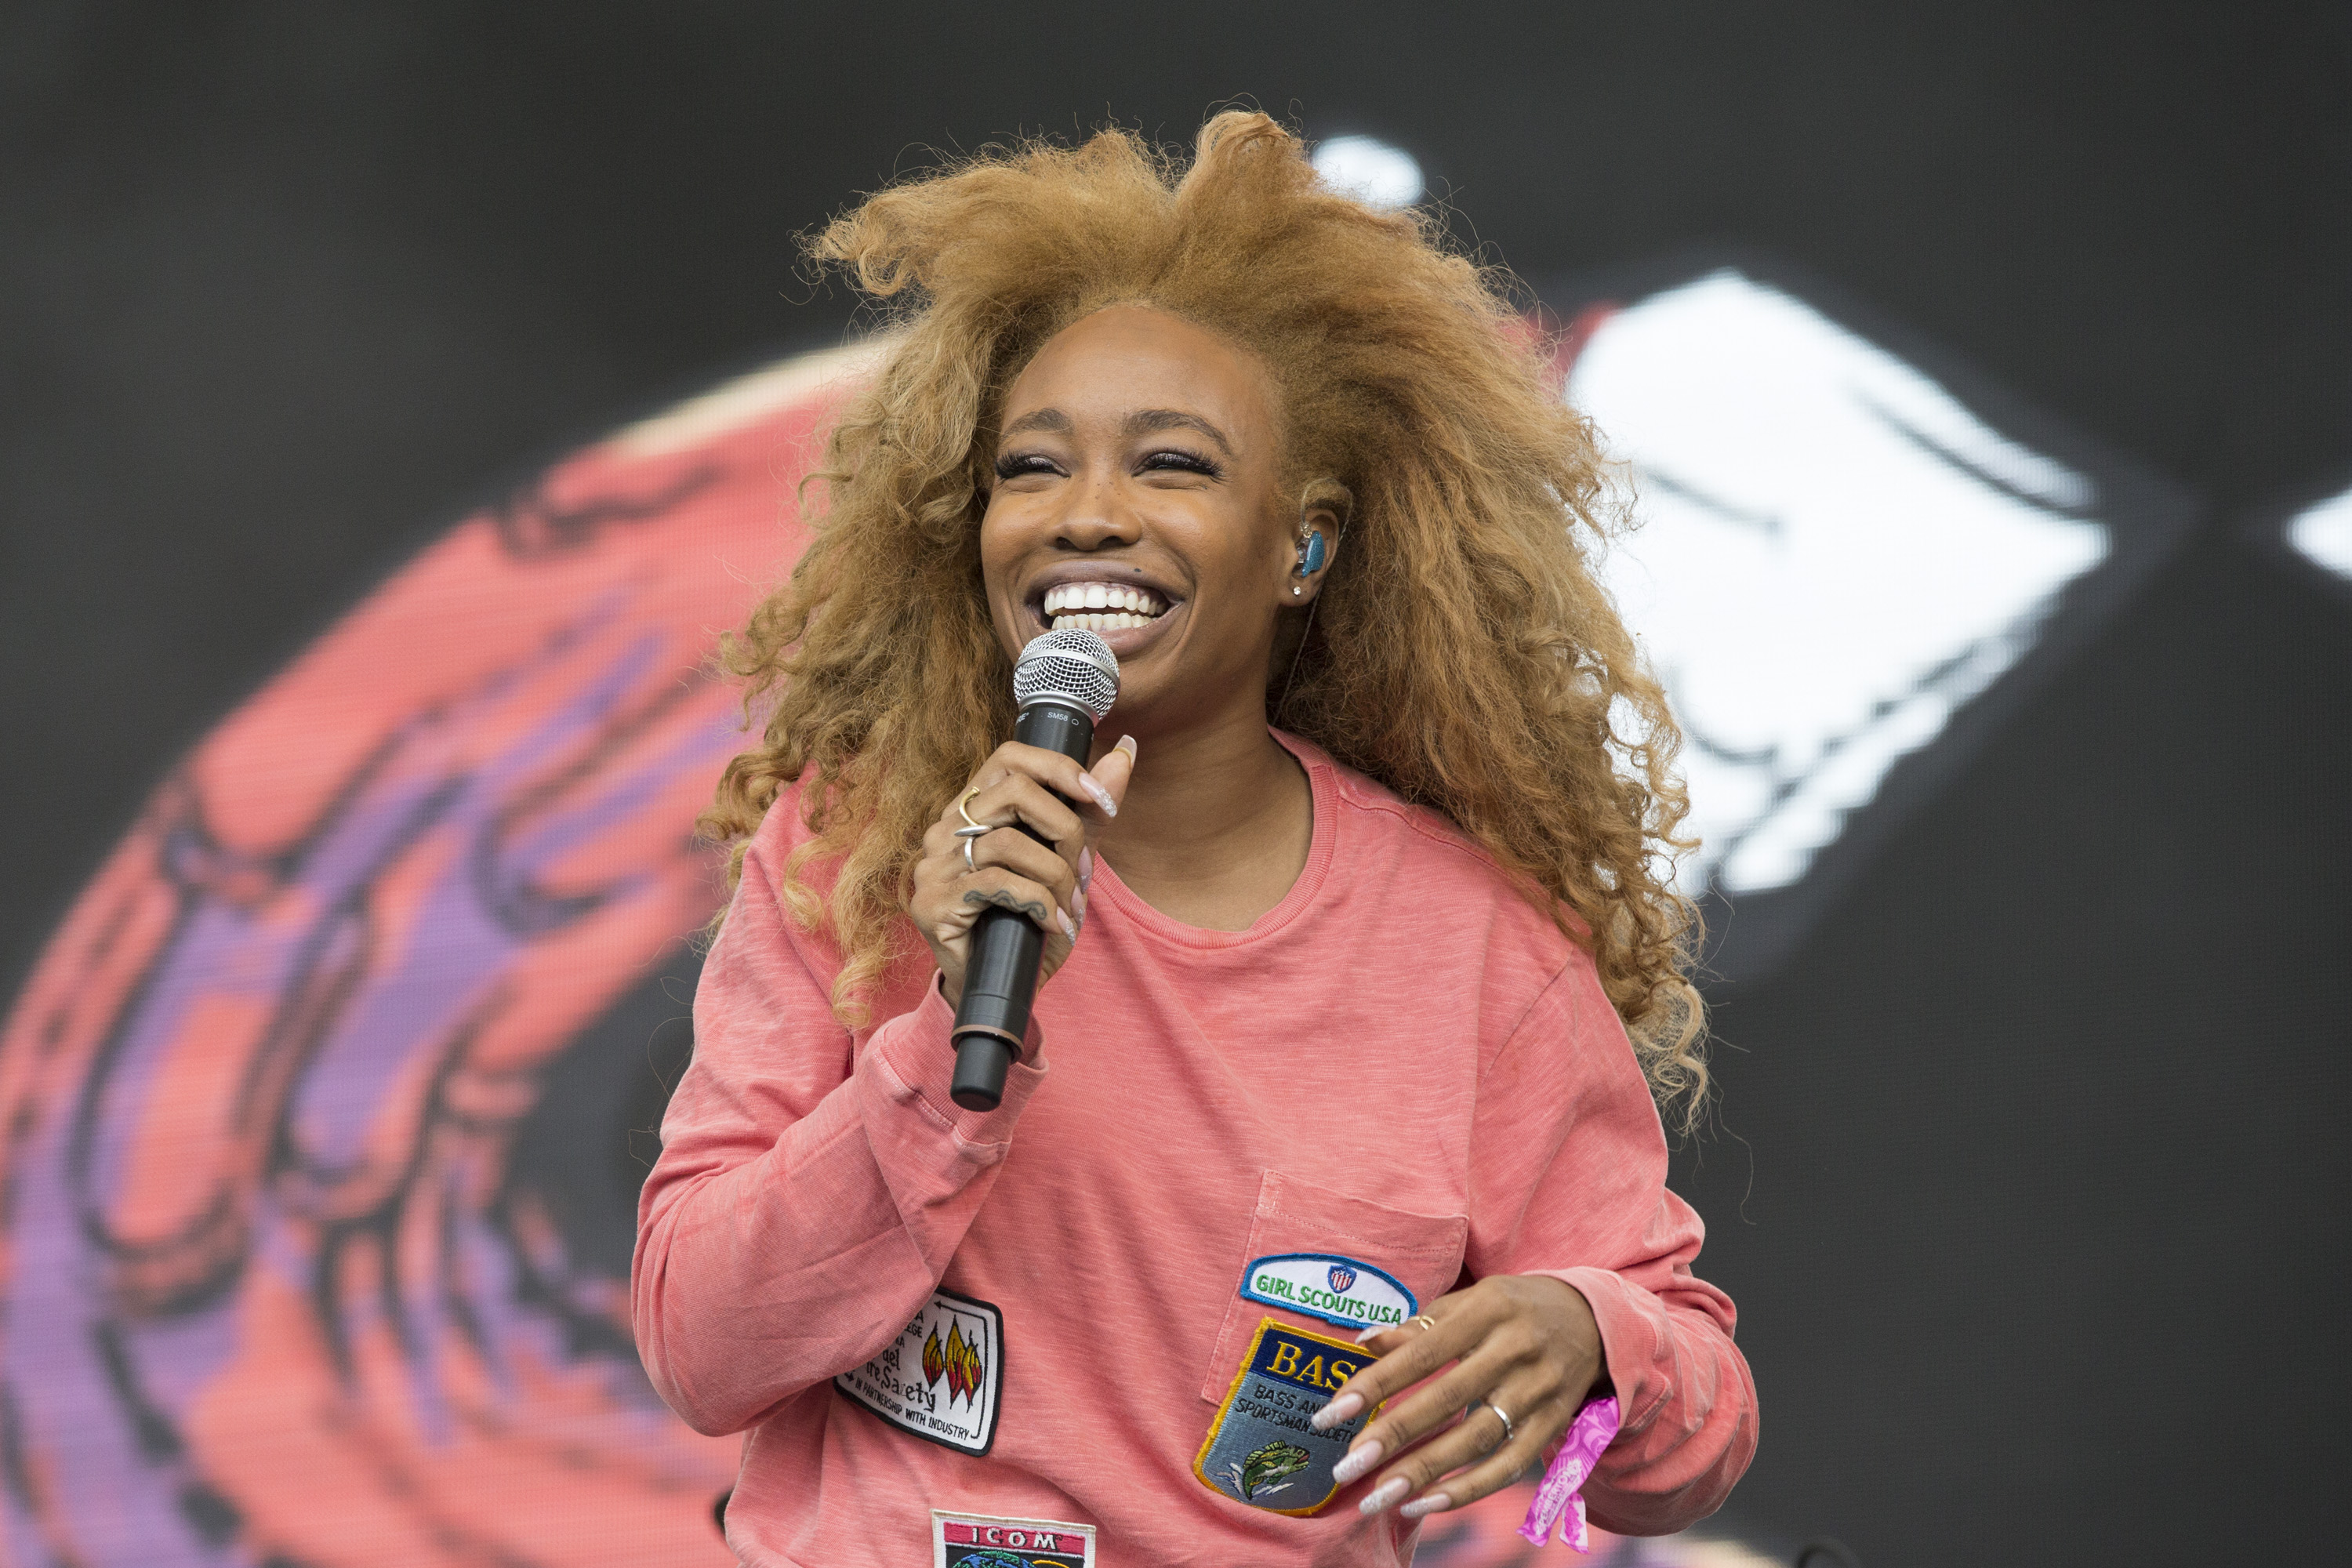 Sza performs onstage during the Pemberton Music Festival in Pemberton